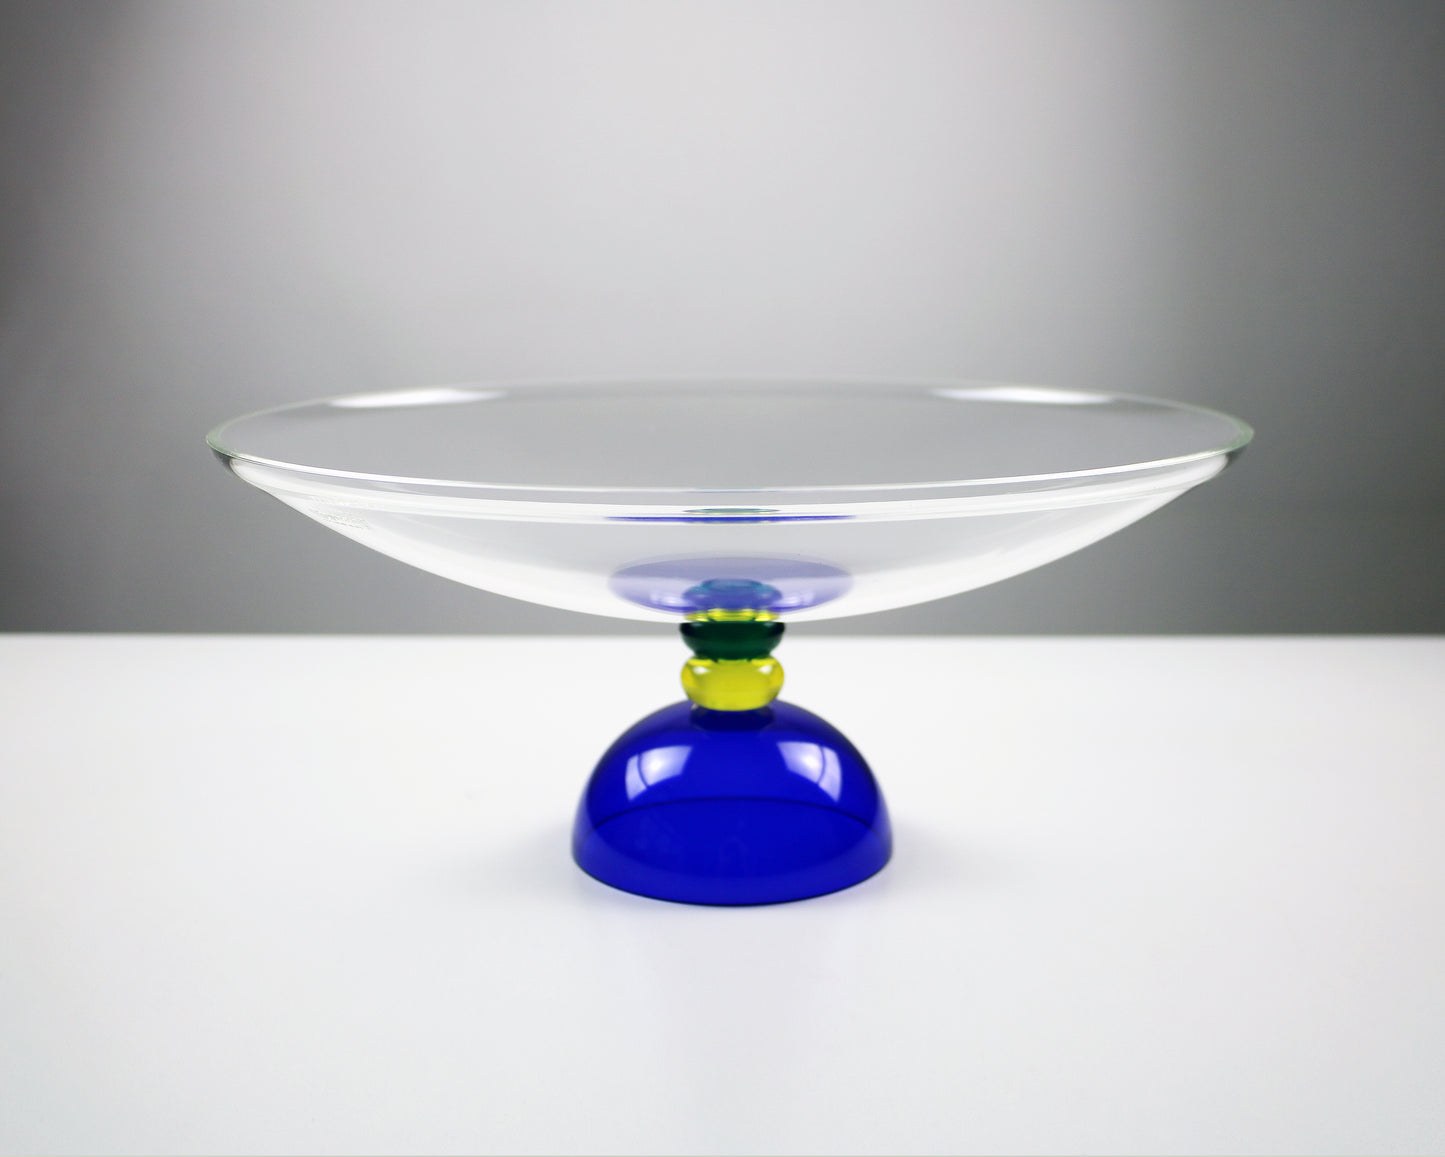 1990s Memphis inspired acrylic pedestal fruit bowl - Colors by Guzzini of Italy